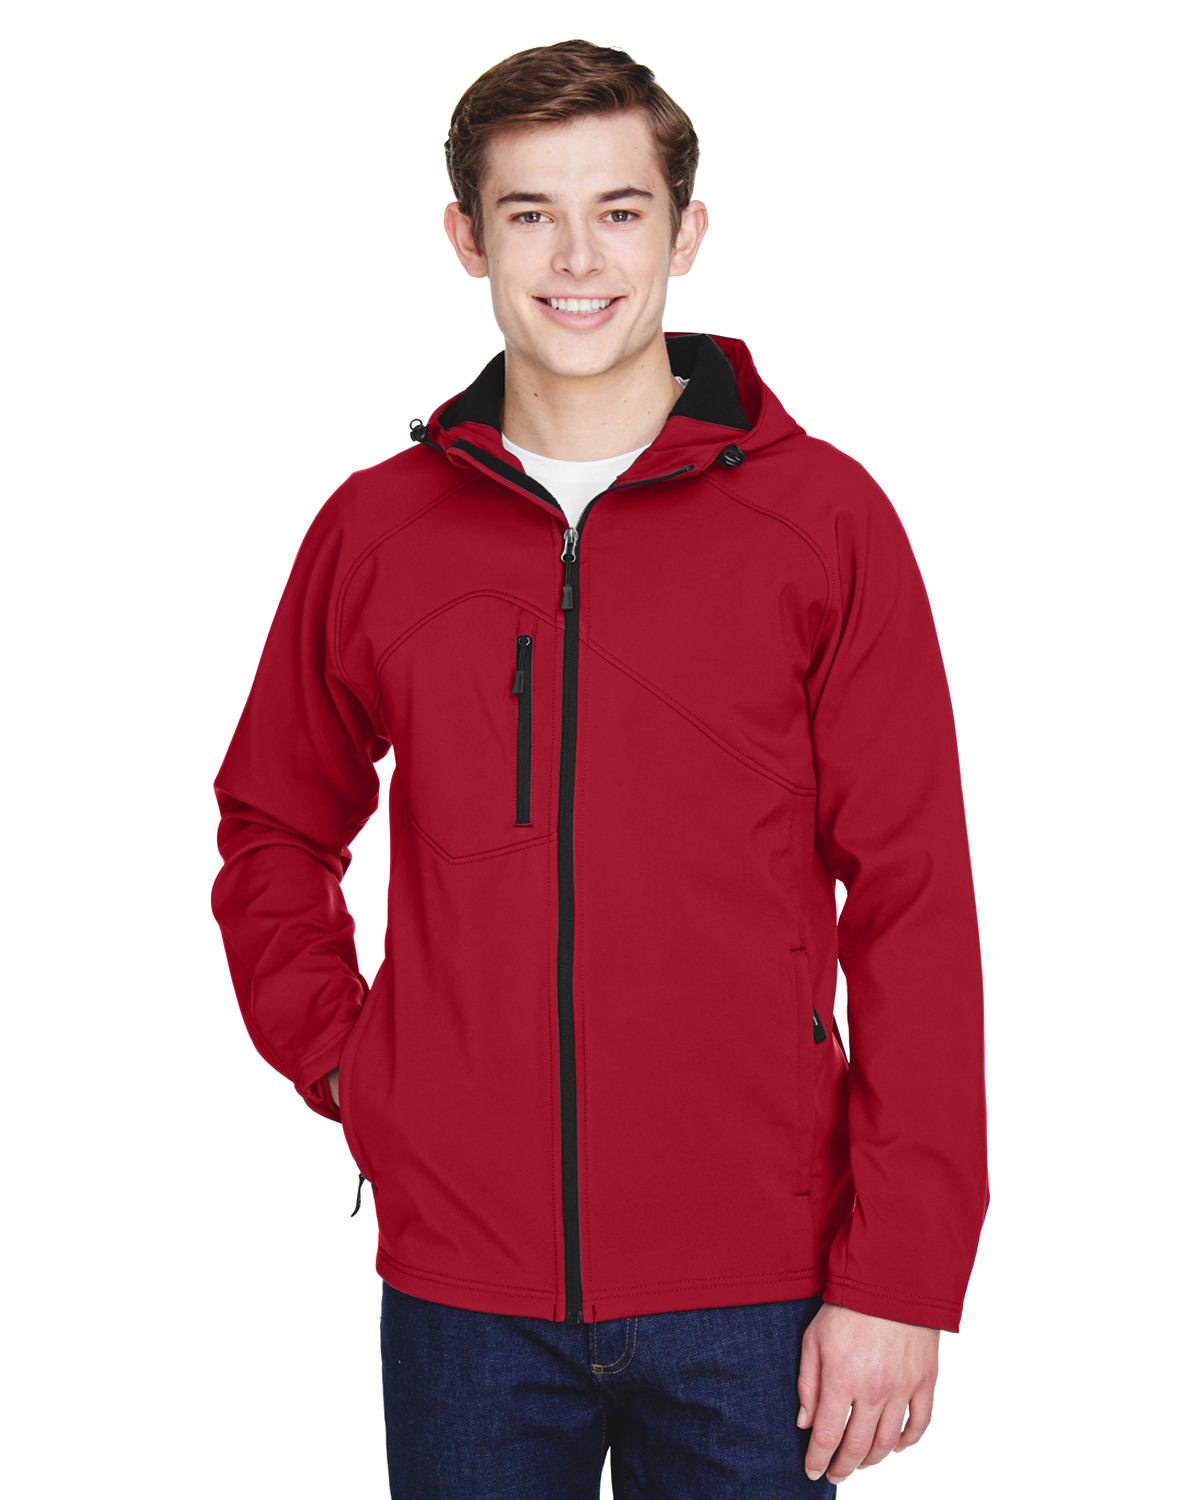 Men's Prospect Two-Layer Fleece Bonded Soft Shell Hooded Jacket - MOLTEN RED - XL - image 1 of 3